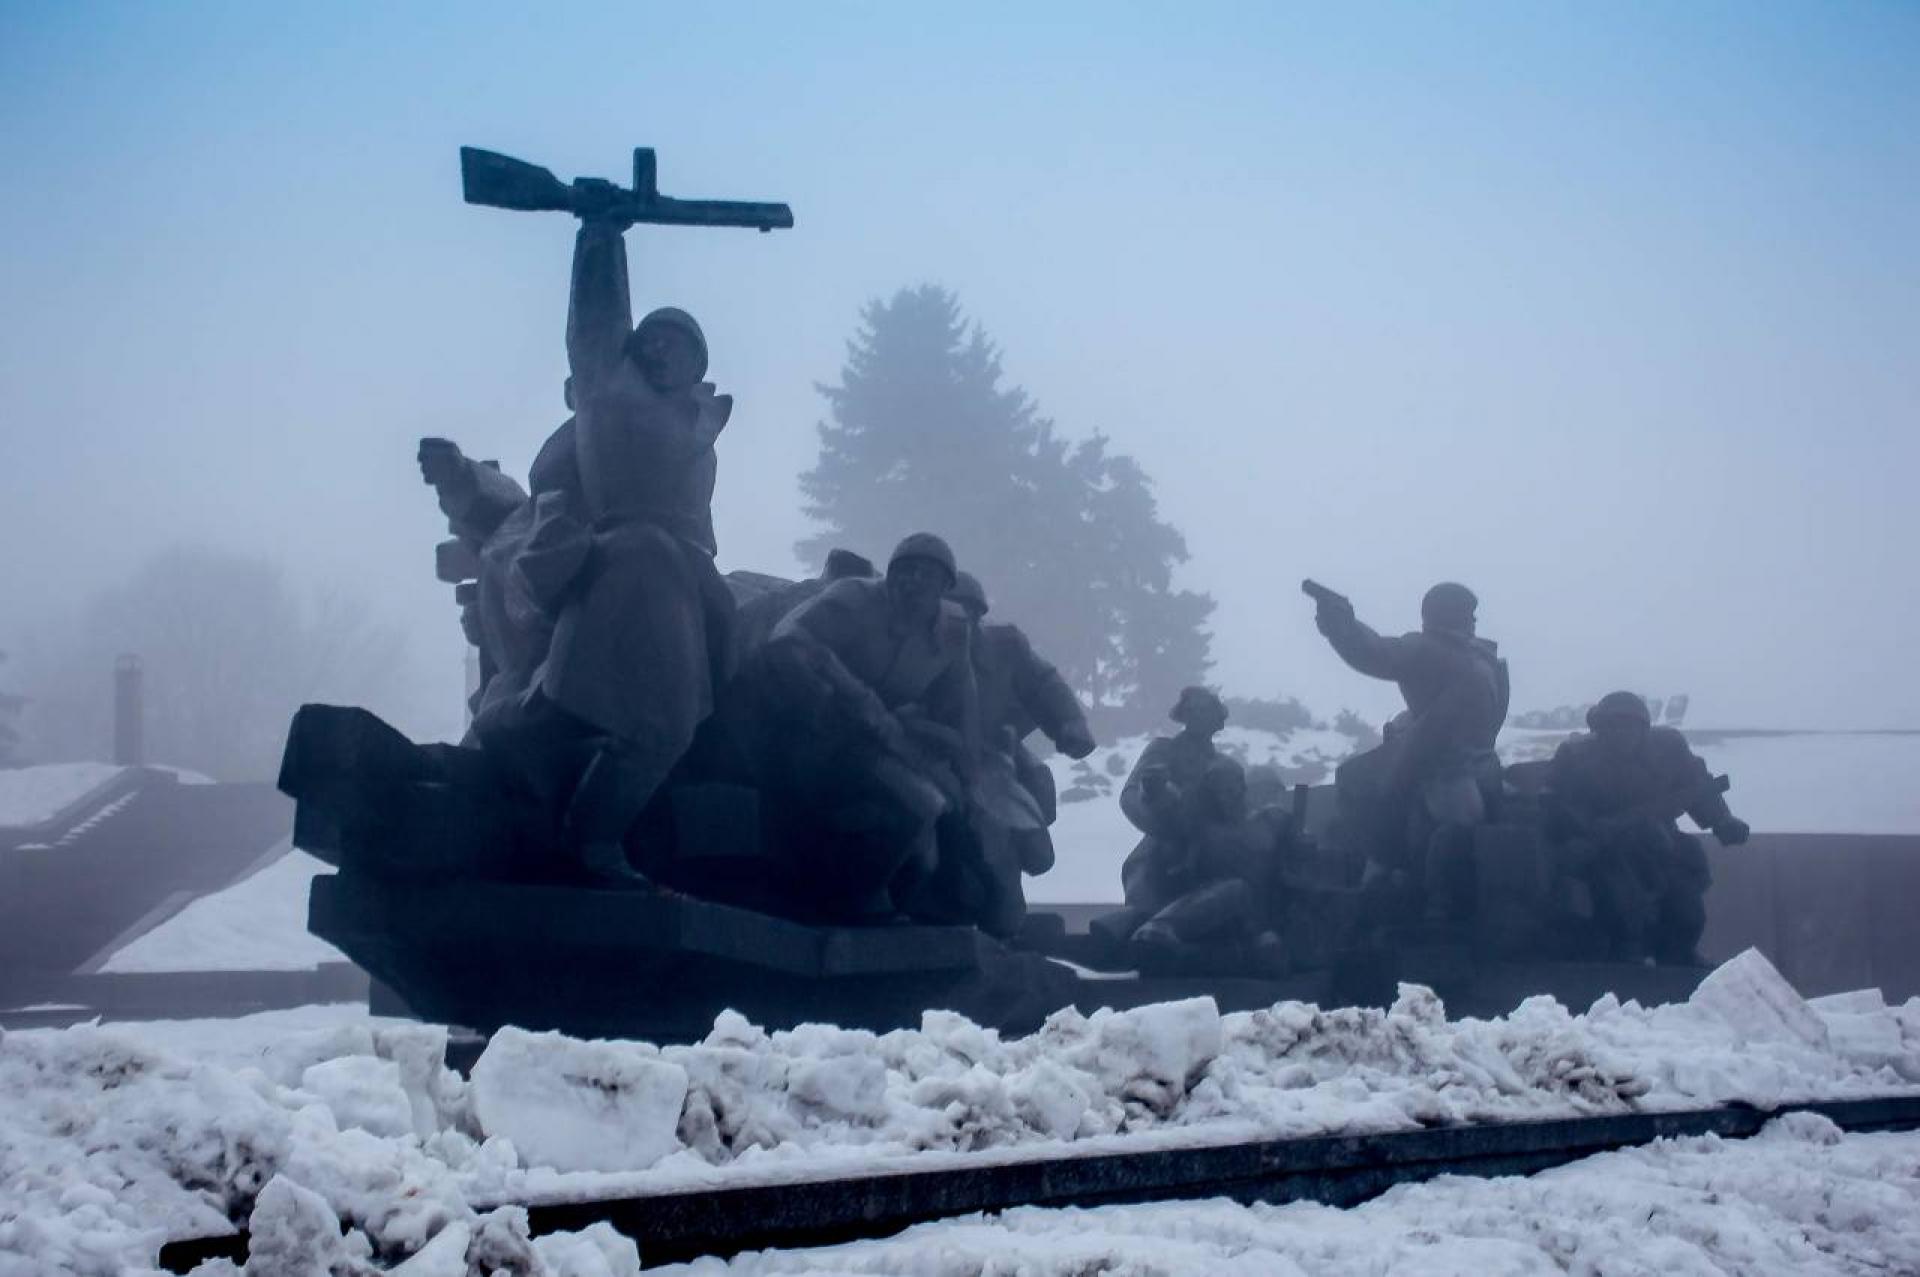 Crossing the Dnieper; an evocative socialist realist monument.